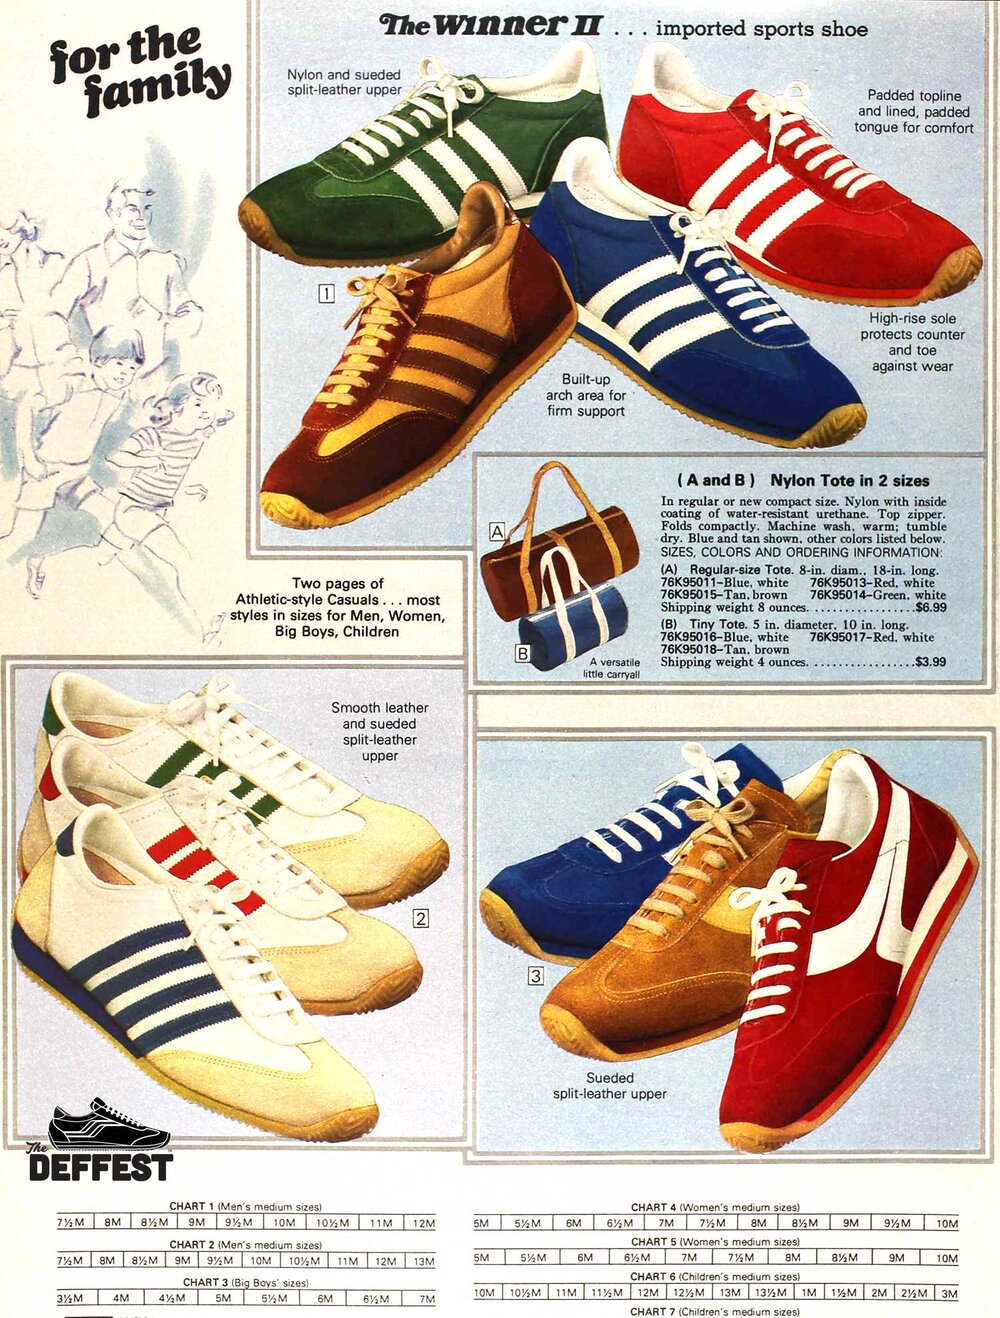 built by converse just for sears — The Deffest®. A vintage and retro  sneaker blog. — Vintage Ads